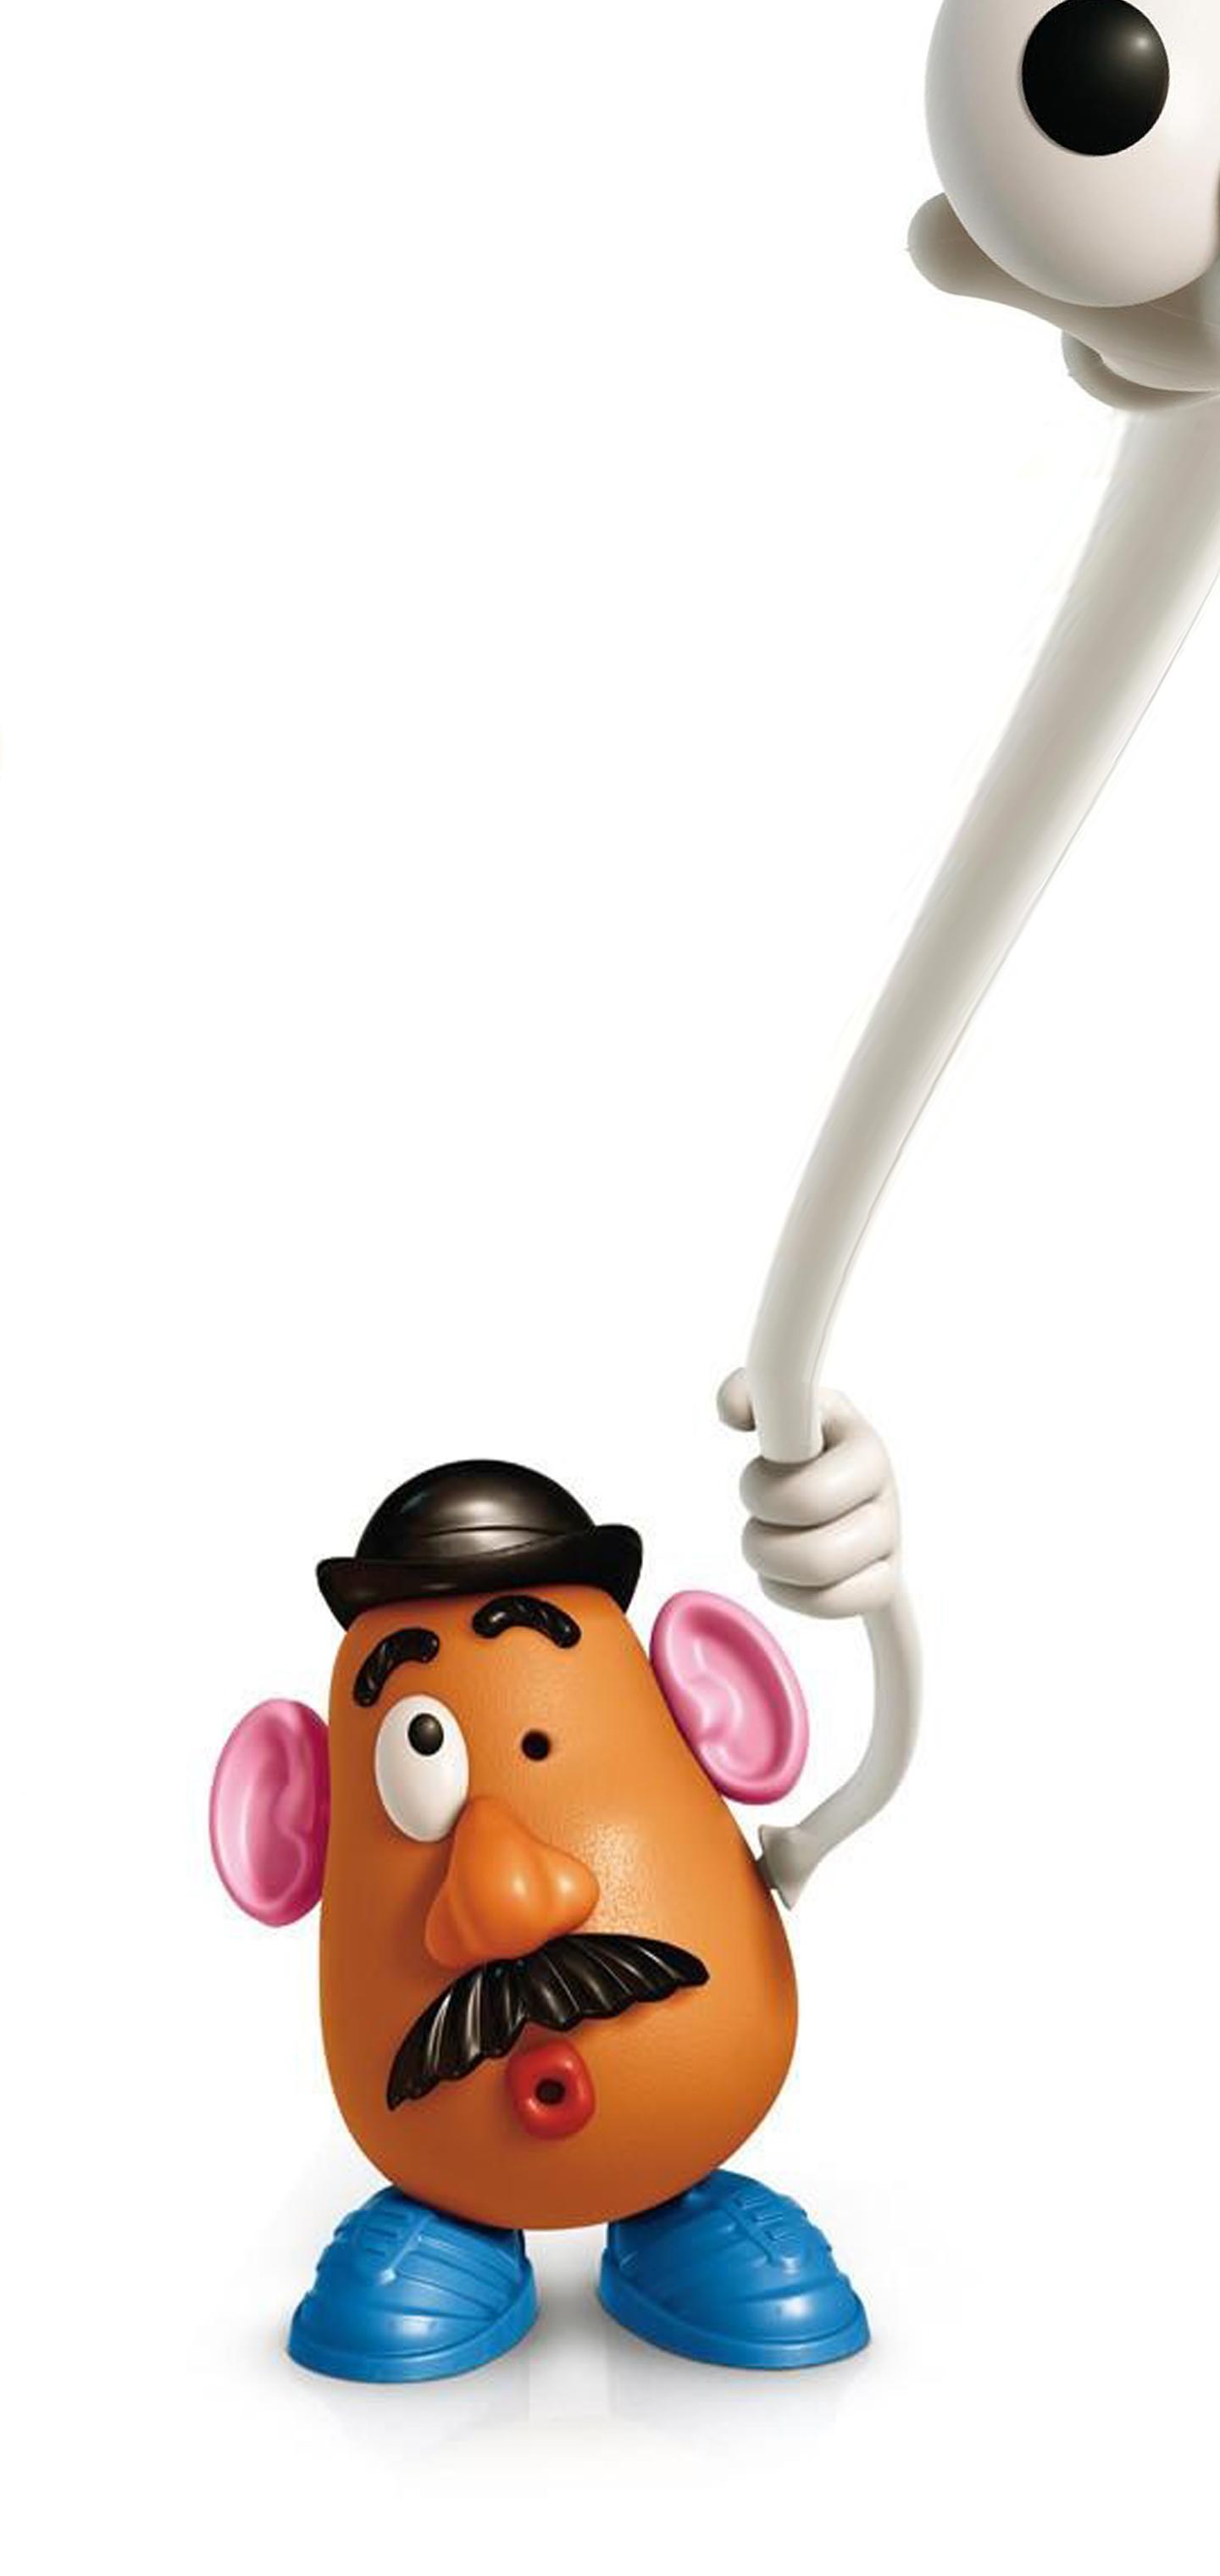 Mr. Potato Head Of Toy Story Galaxy S10 Hole Punch Wallpaper